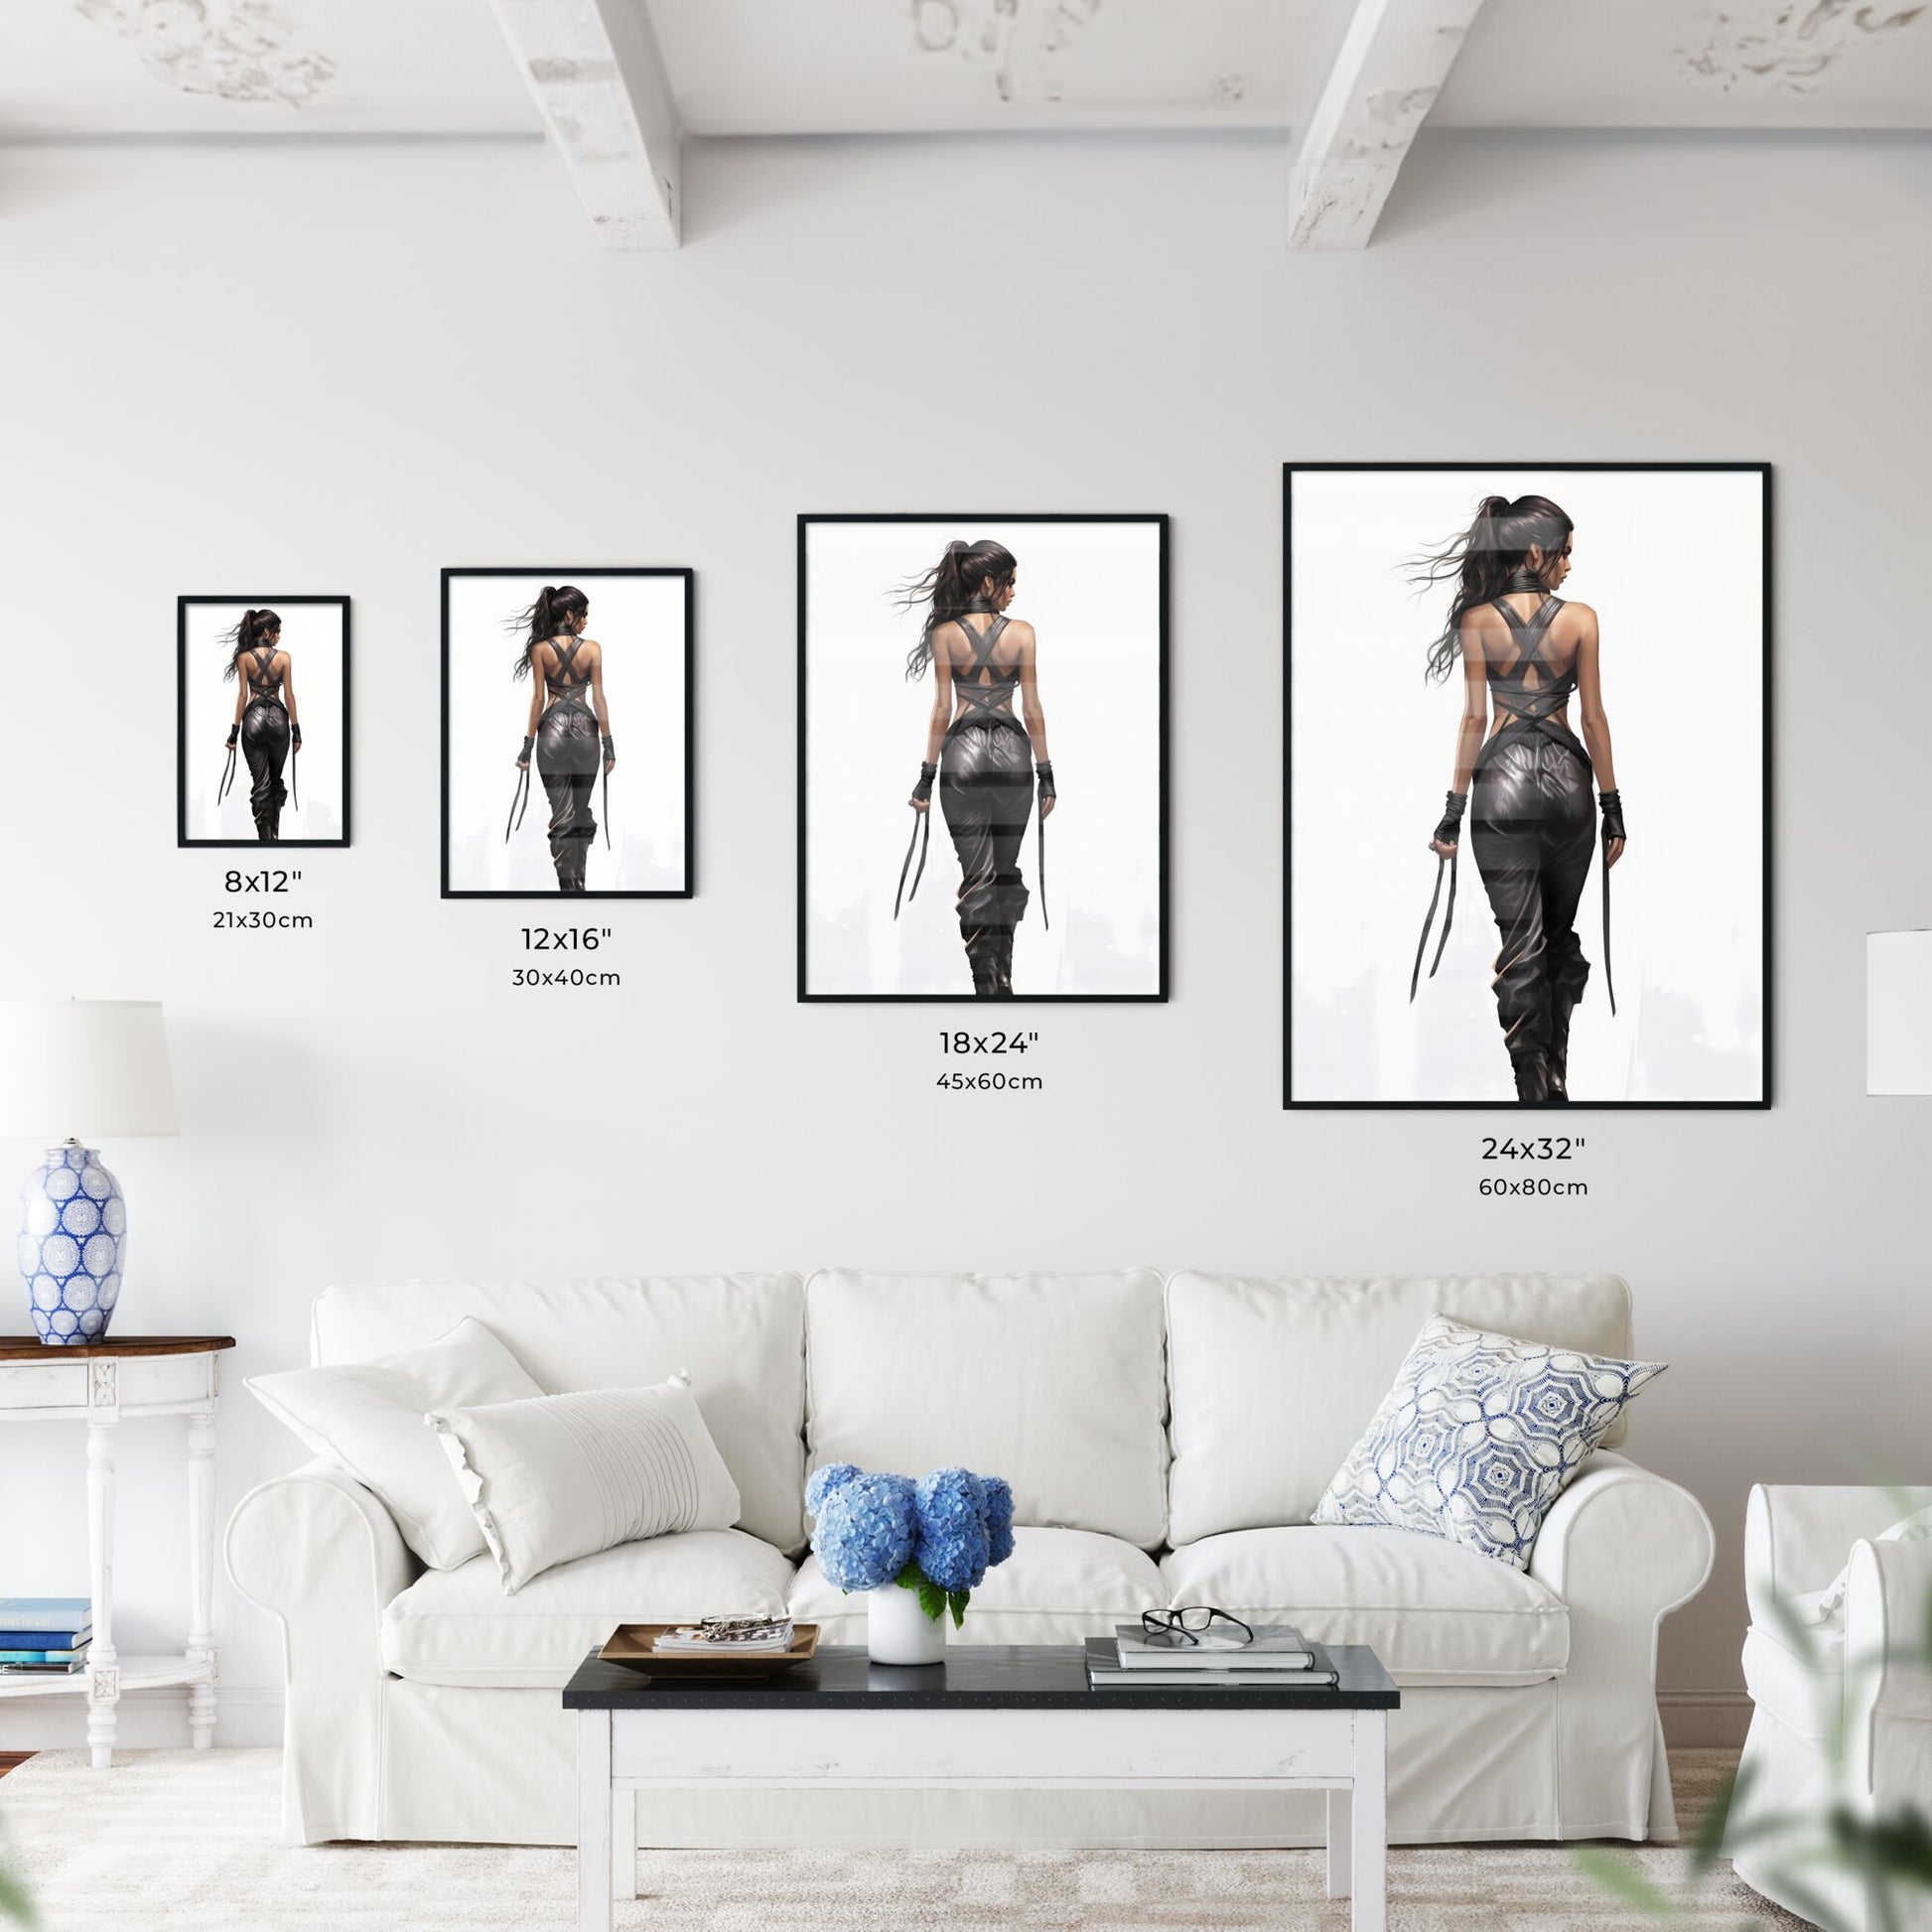 A Poster of concept art fashion concept - A Woman In Black Leather Pants With A Sword Default Title